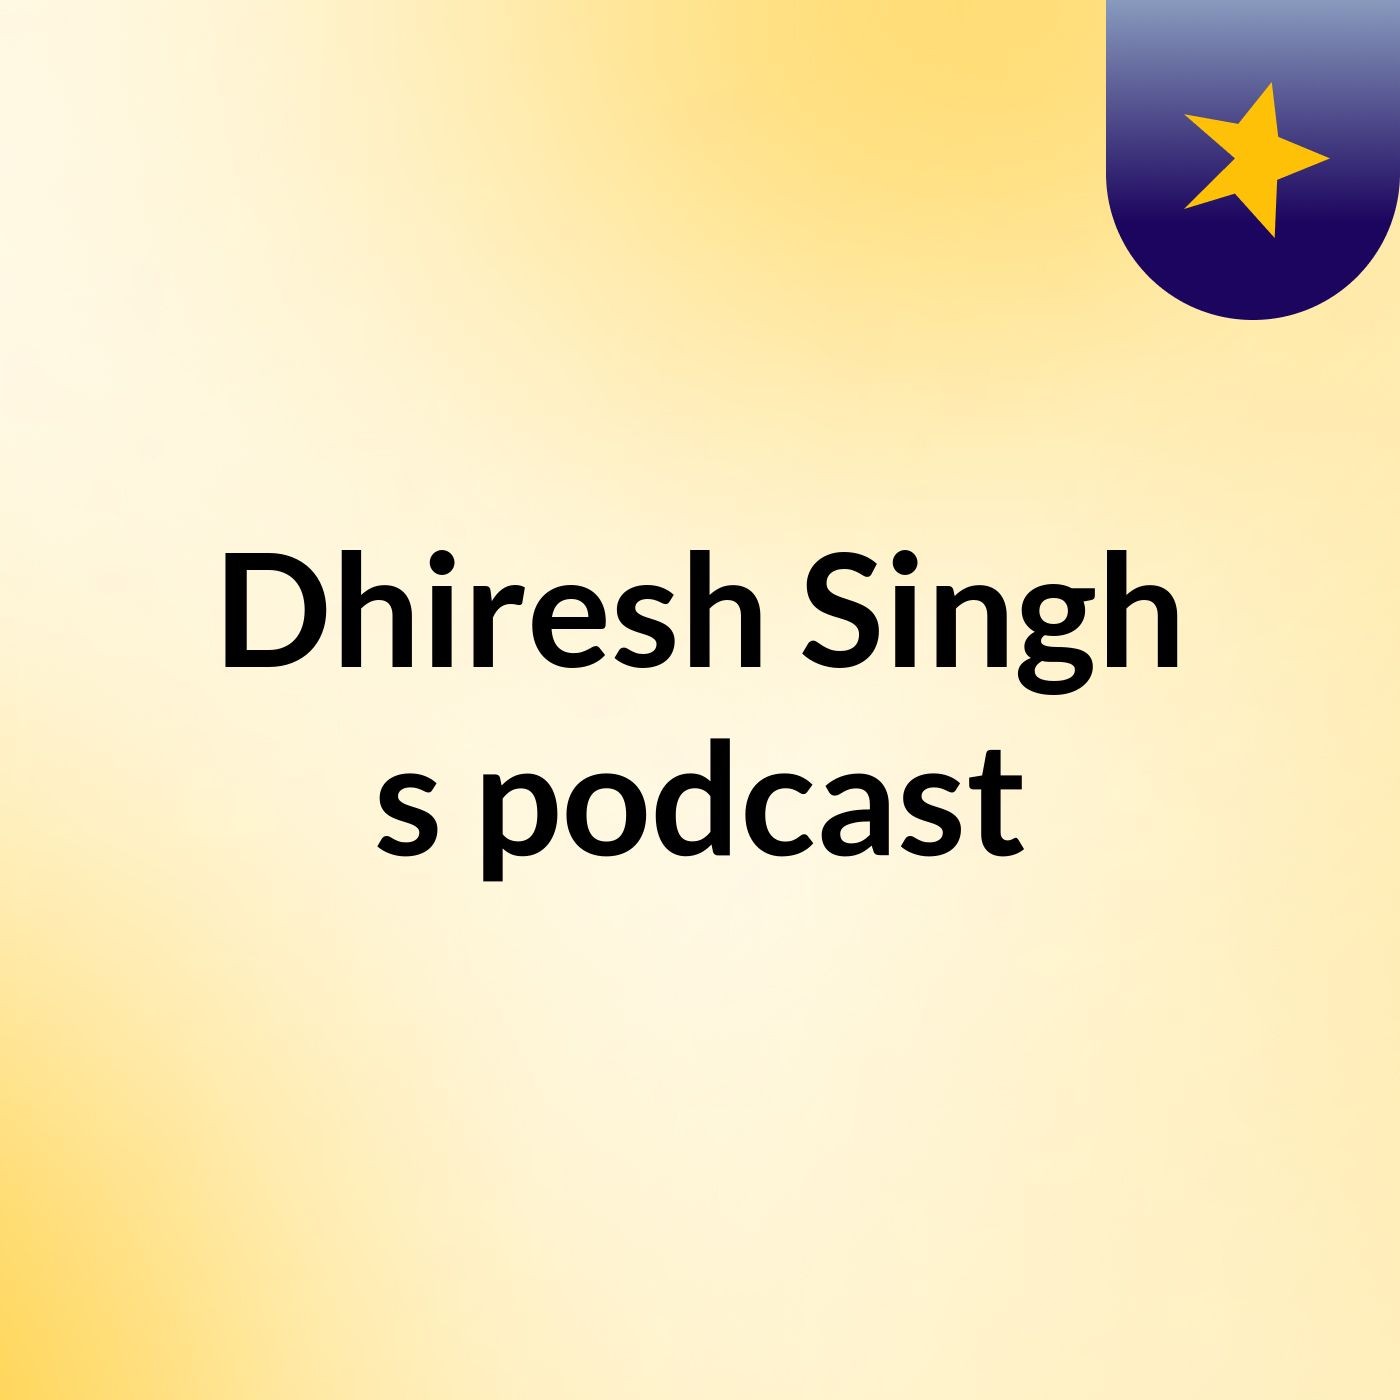 Episode 3 - Dhiresh Singh's podcast